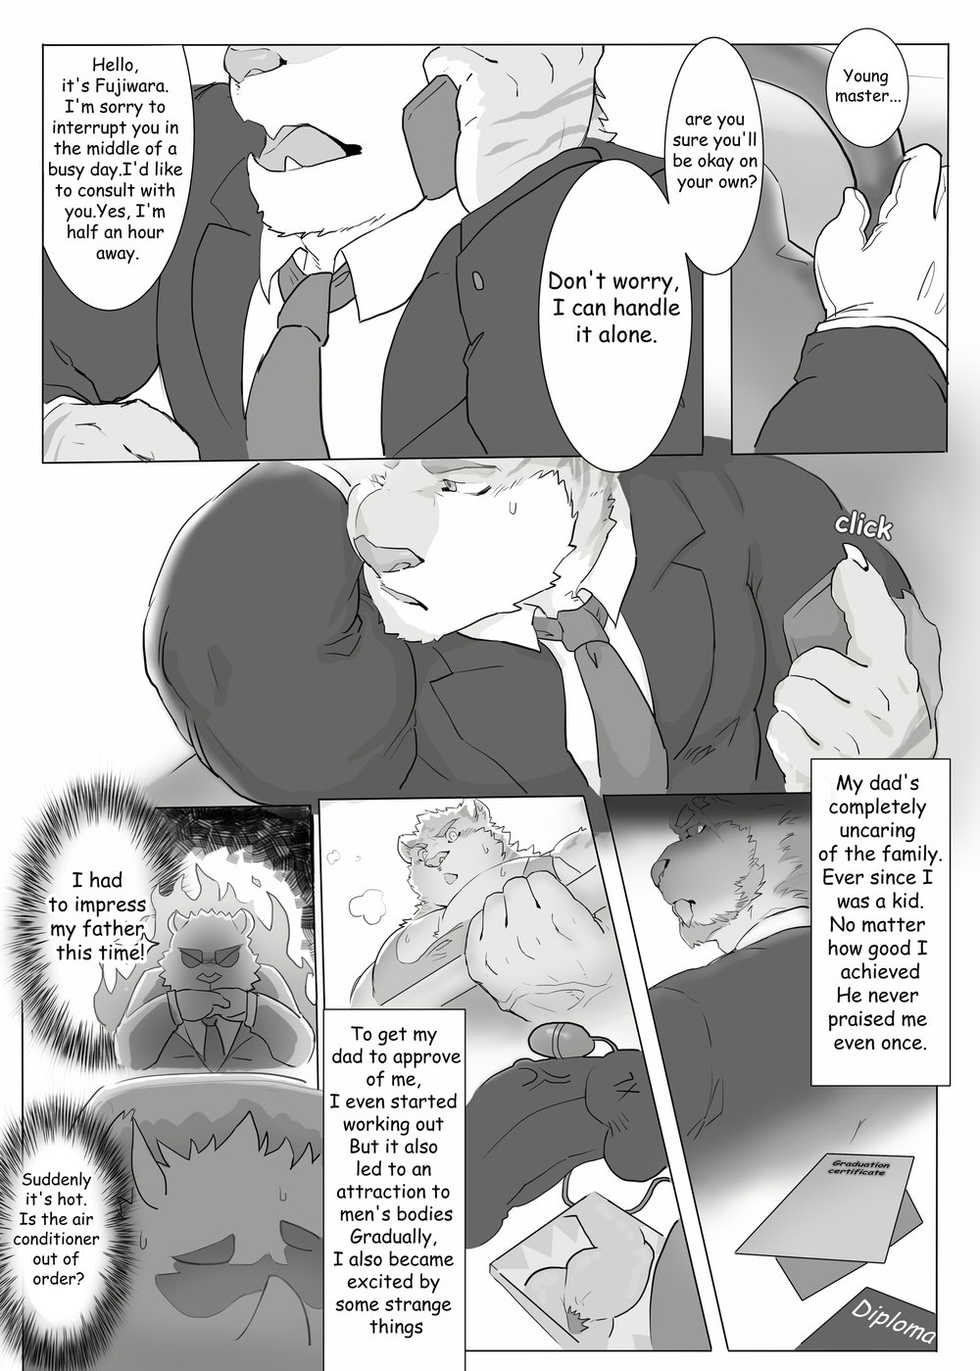 [Renoky] Encounter on Construction site [English] [Digital] - Page 3